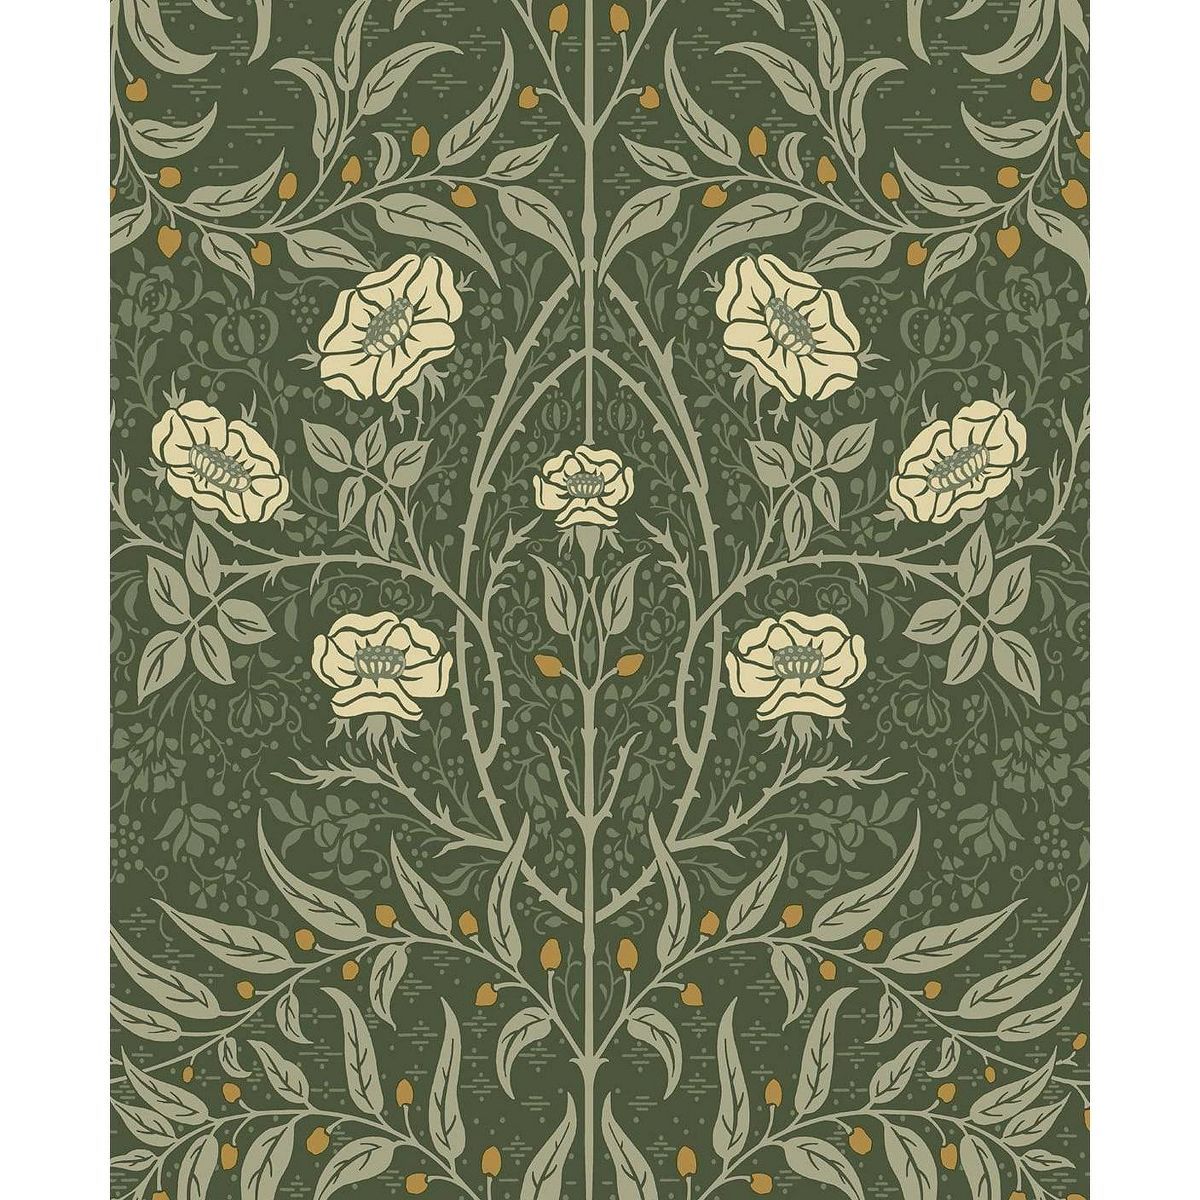 NextWall Stenciled Floral Peel and Stick Wallpaper Green | Target